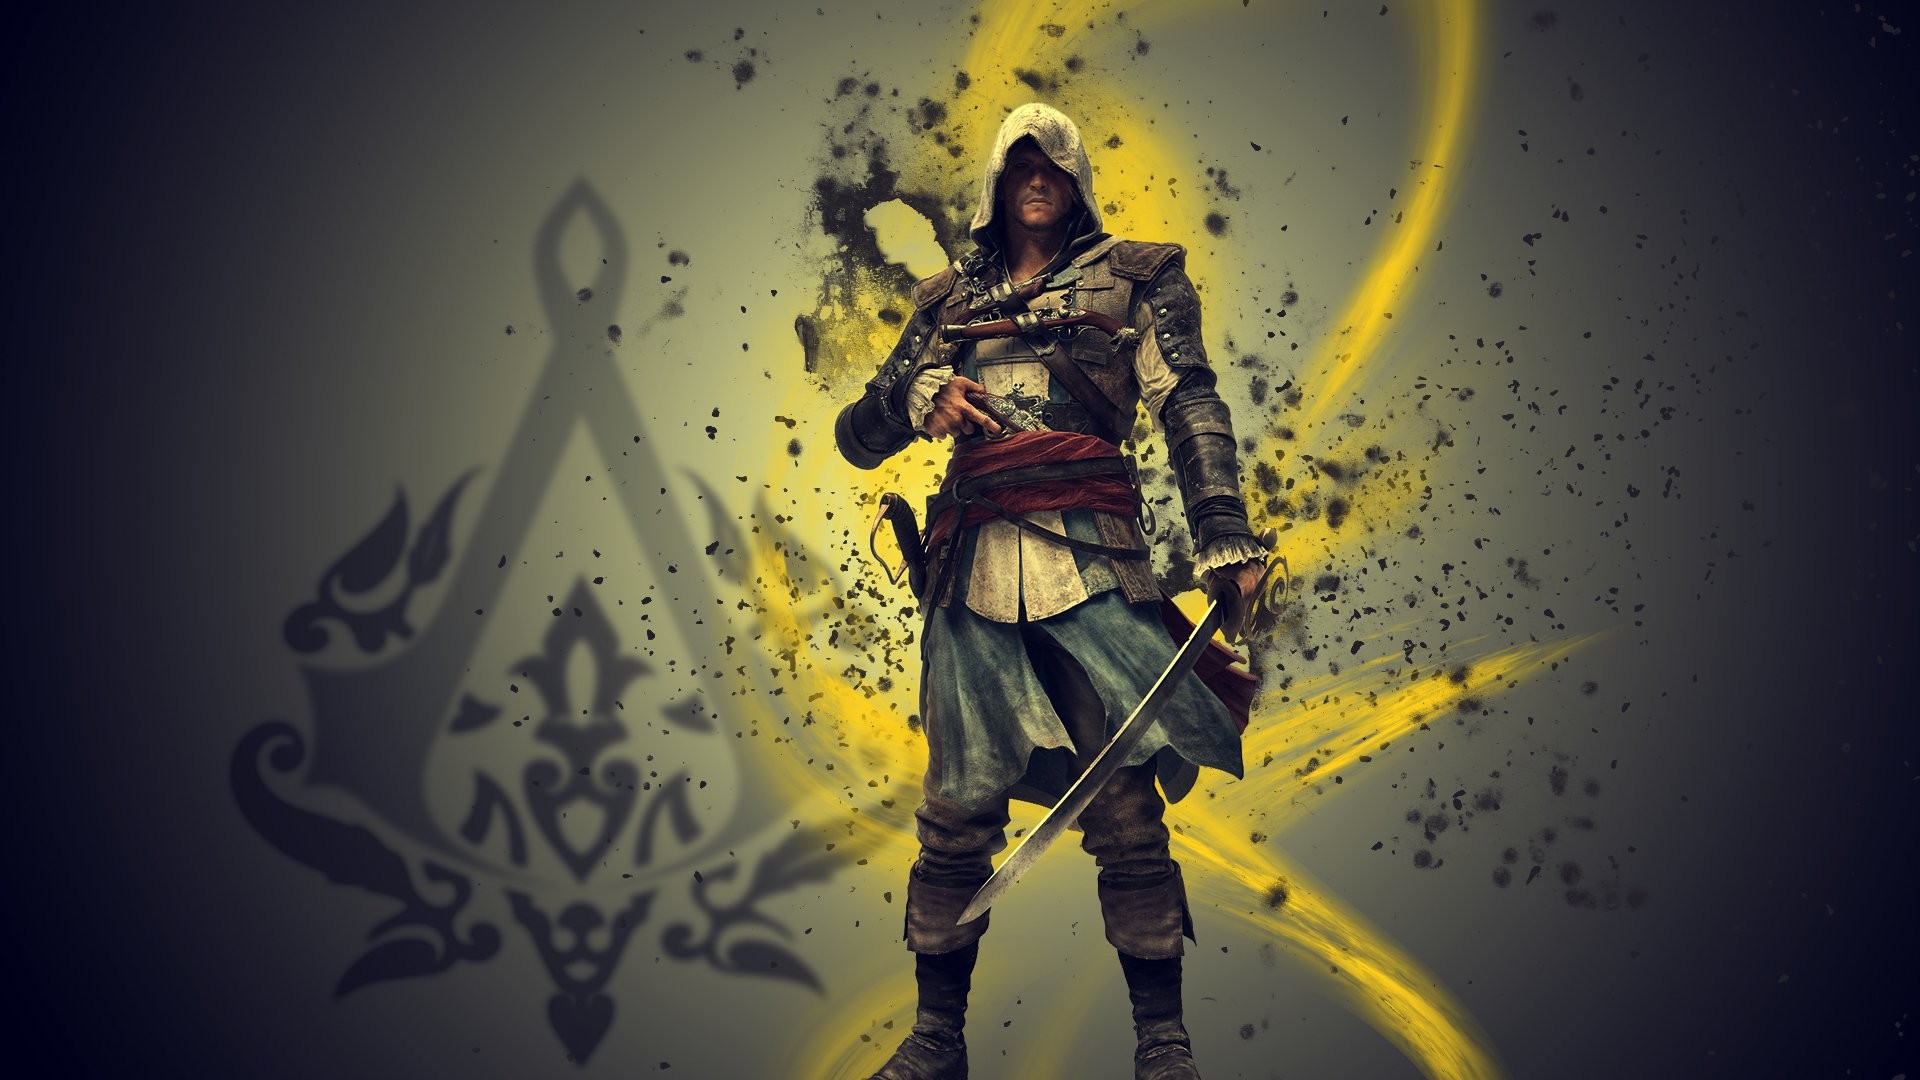 General 1920x1080 Assassin's Creed video games video game art video game men Ubisoft PC gaming